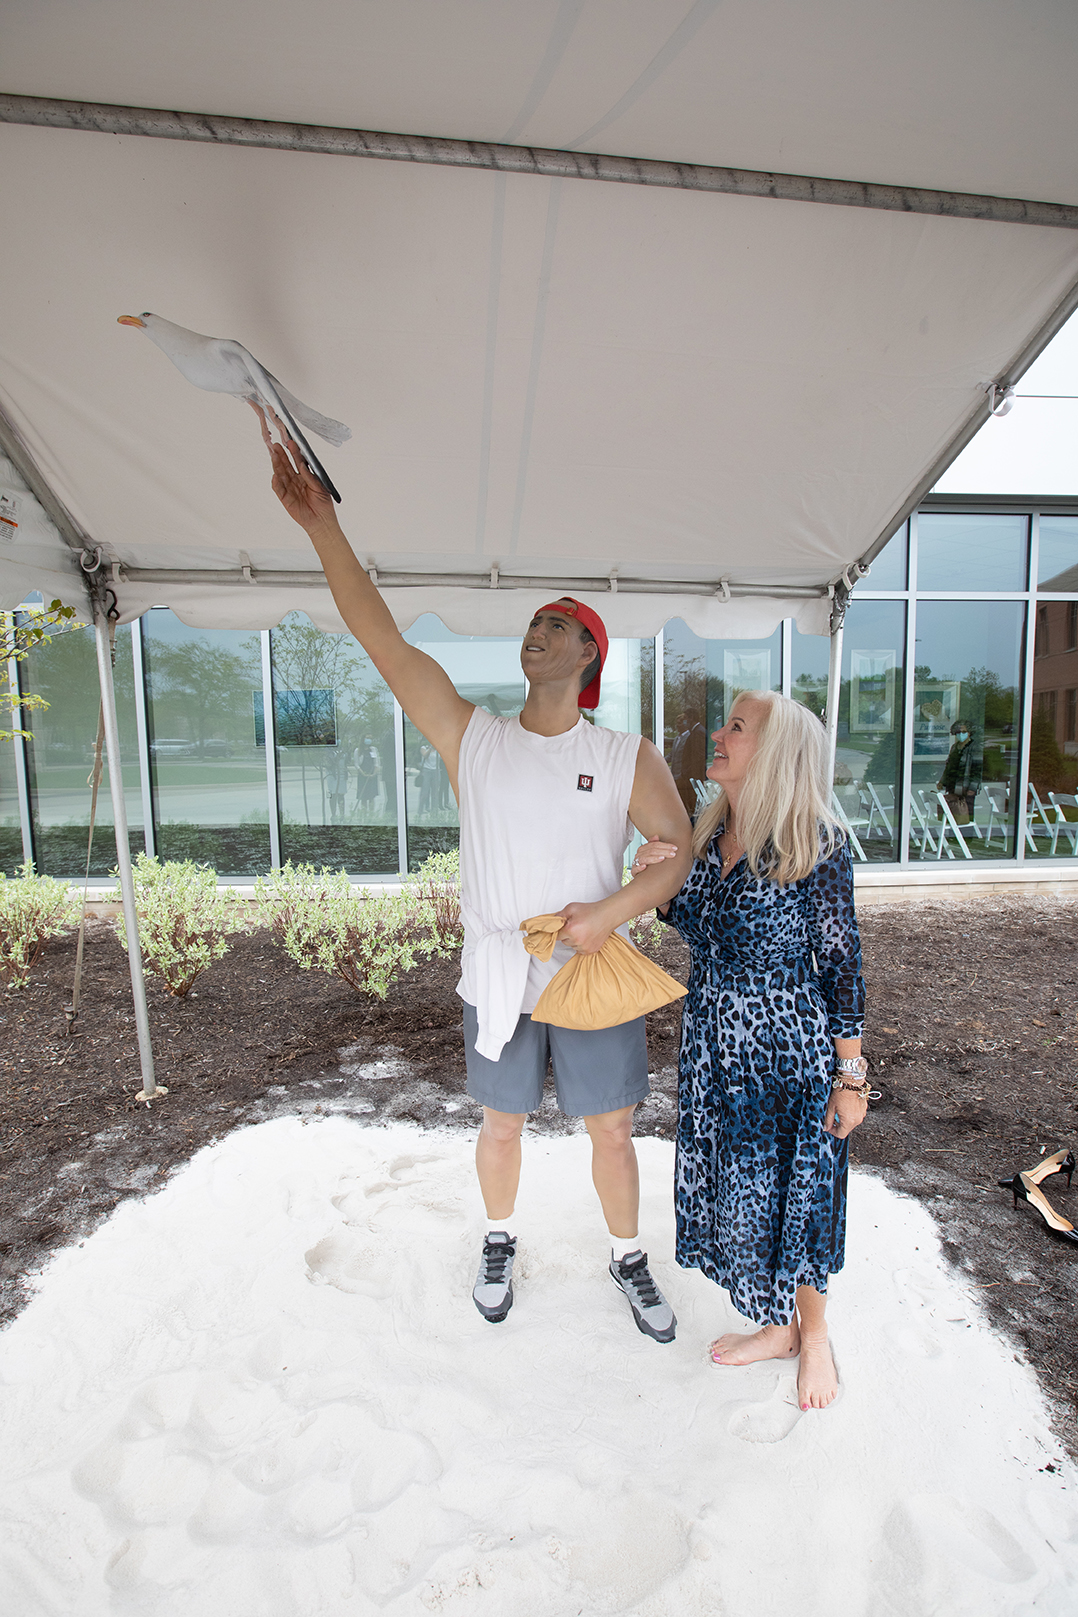 Late sculptor’s final works unveiled at Carmel cancer center